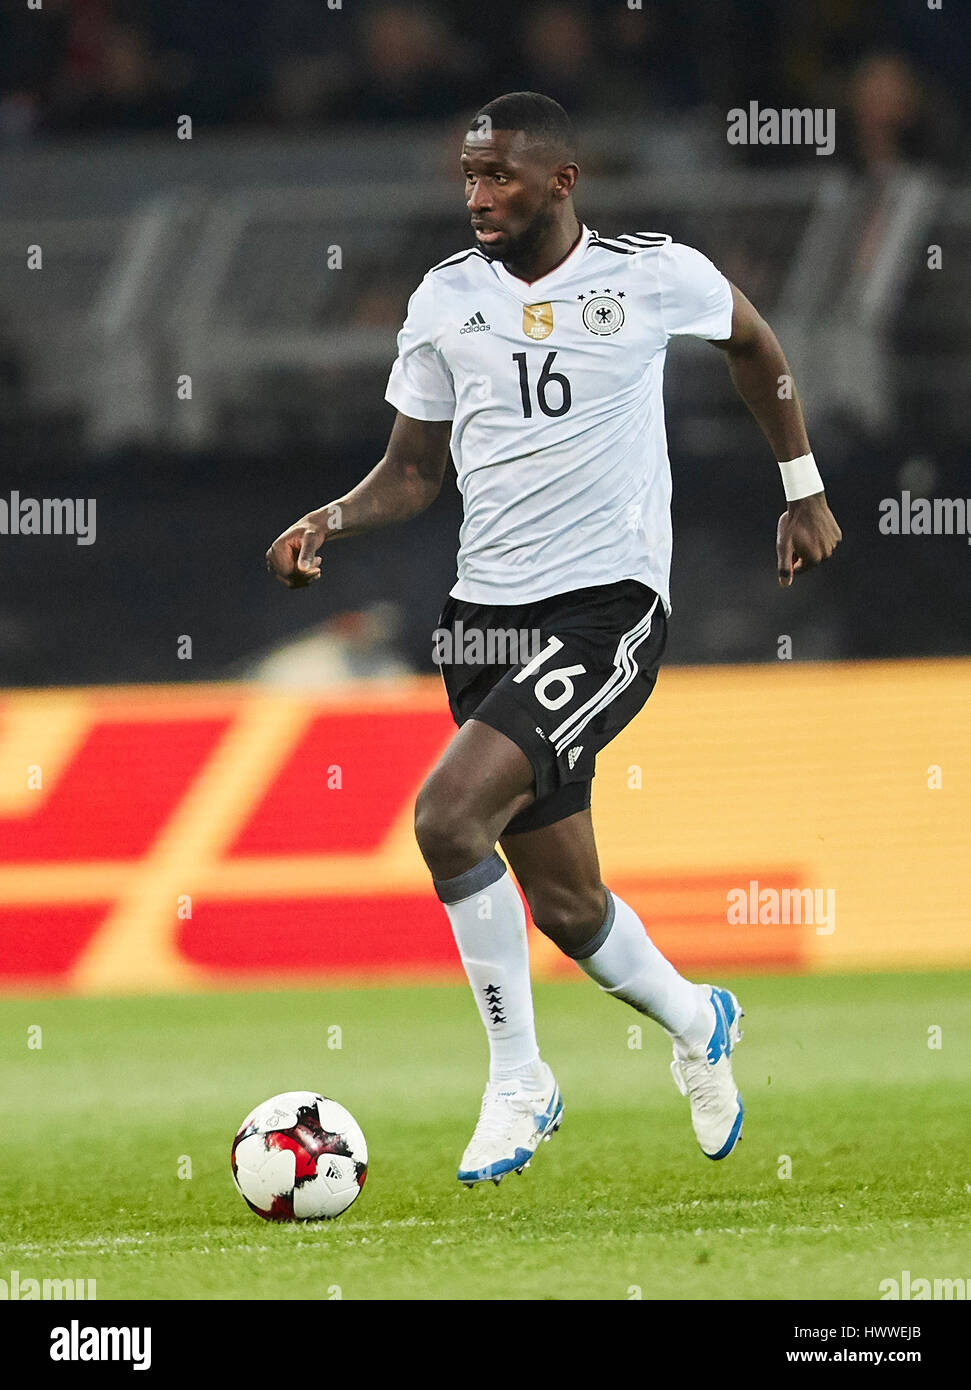 Dortmund, Germany. 22nd Mar, 2017.  Antonio RUEDIGER, DFB16 drives the ball, action, full-size, friendly match and farewell game for Lukas Podolski GERMANY - ENGLAND 1-0 in Dortmund, March 22, 2017 Credit: Peter Schatz/Alamy Live News Stock Photo